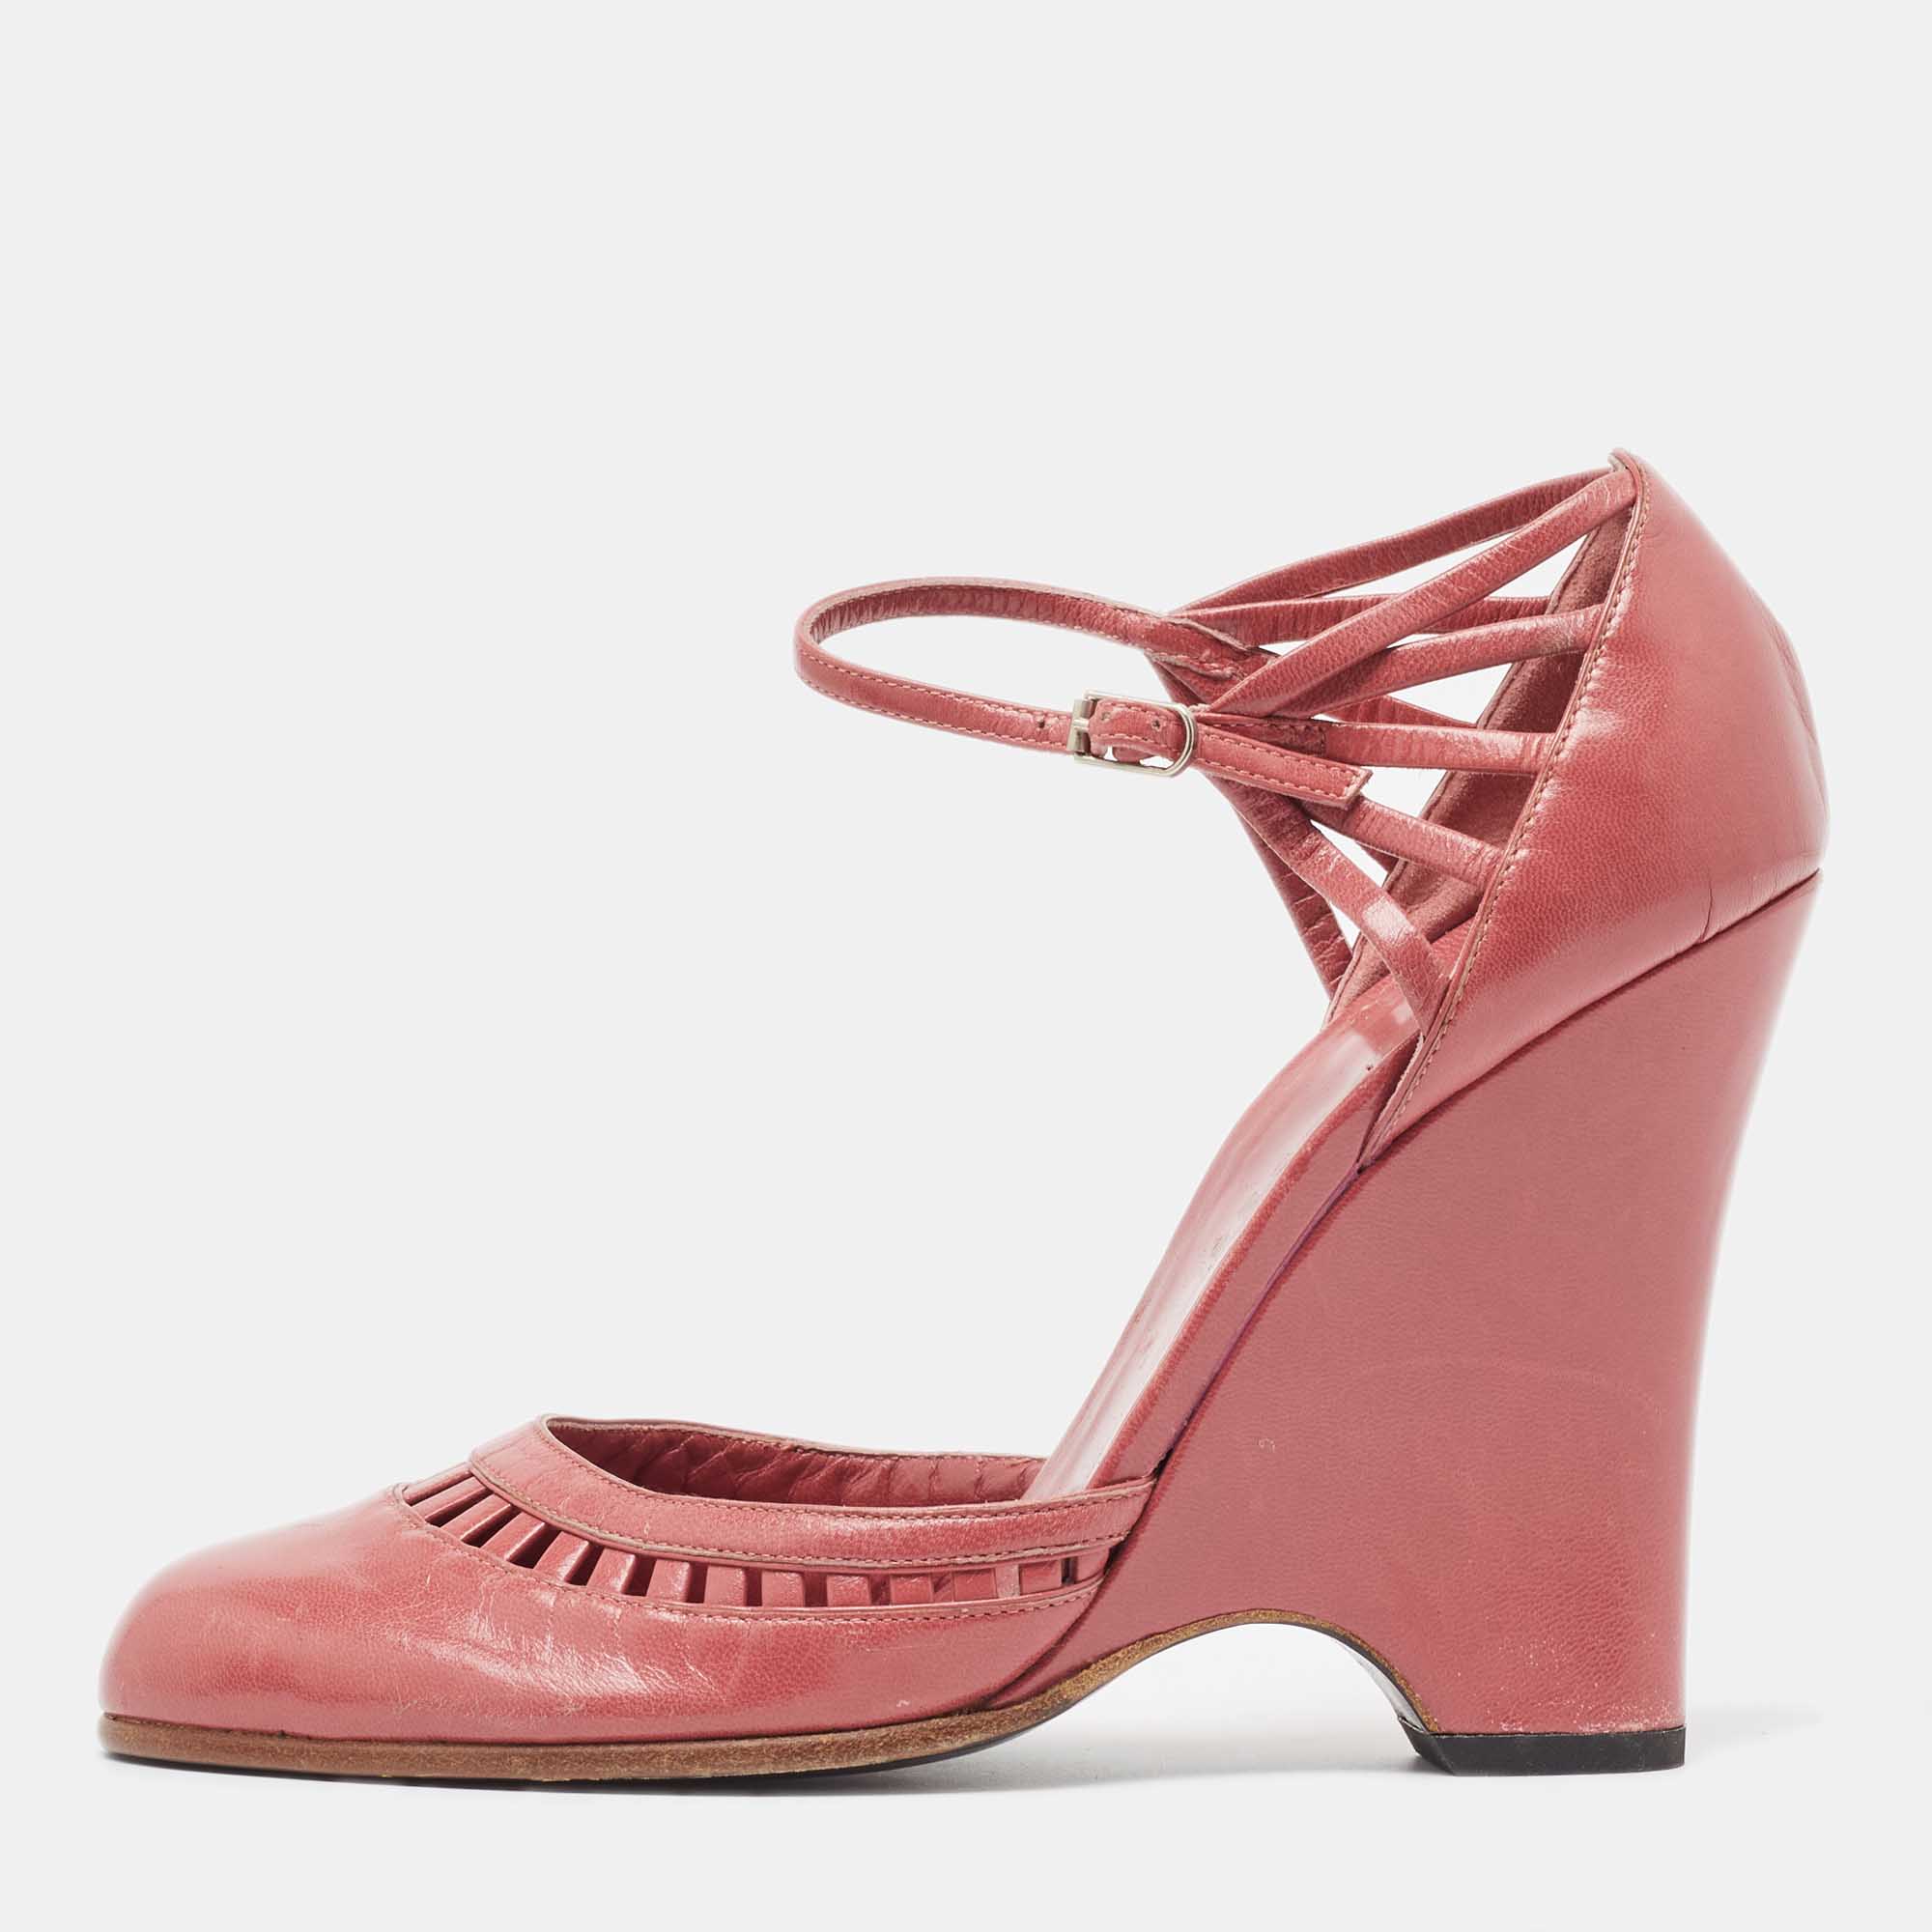 Marc jacobs pink leather ankle strap wedge pumps size 37